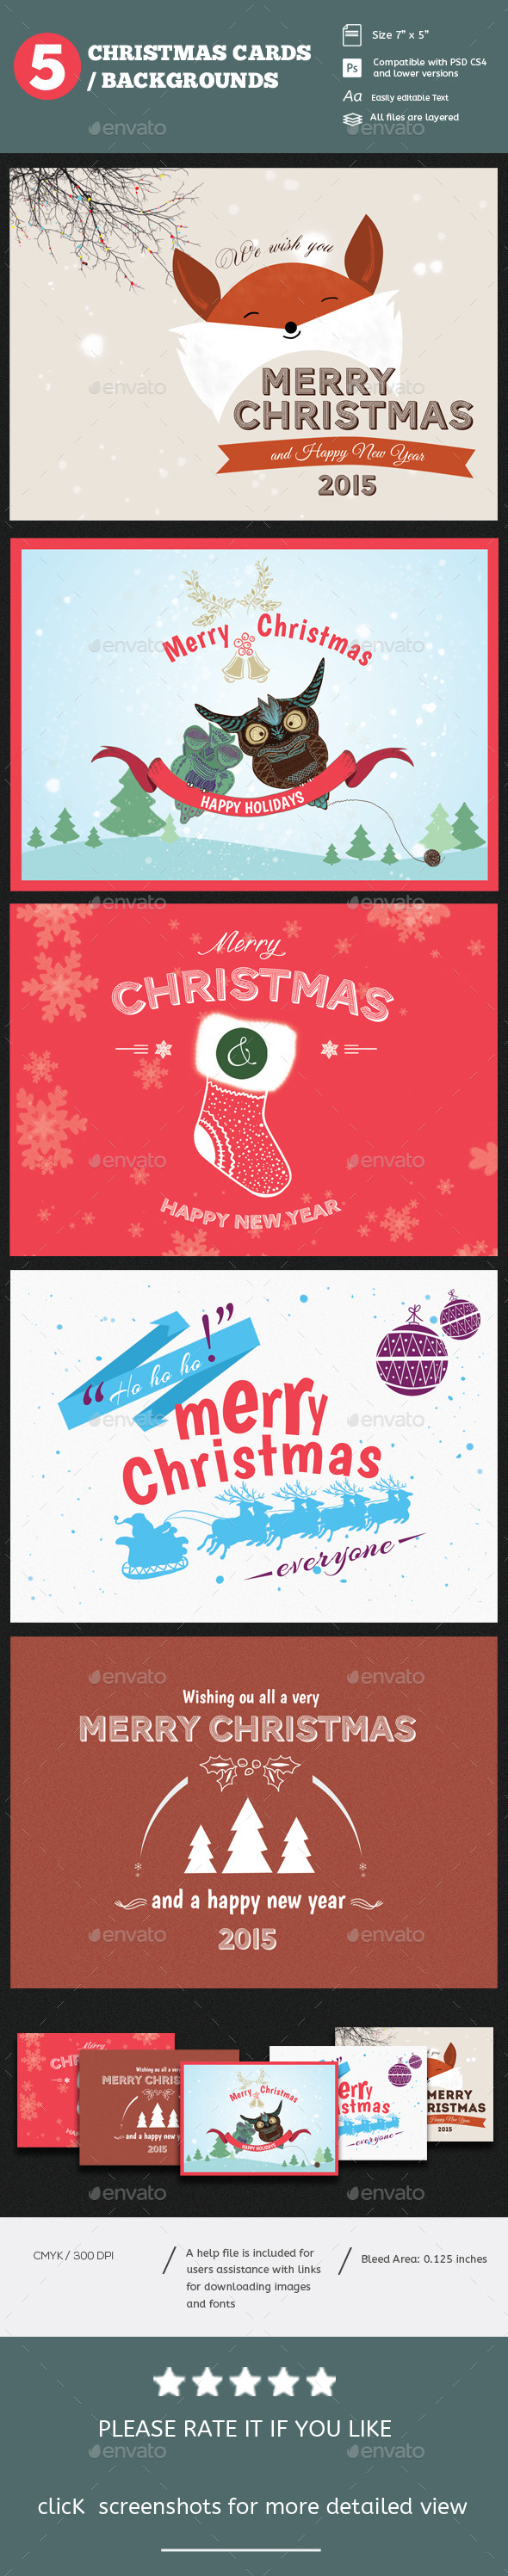 5 Christmas Cards Psd/ Backgrounds